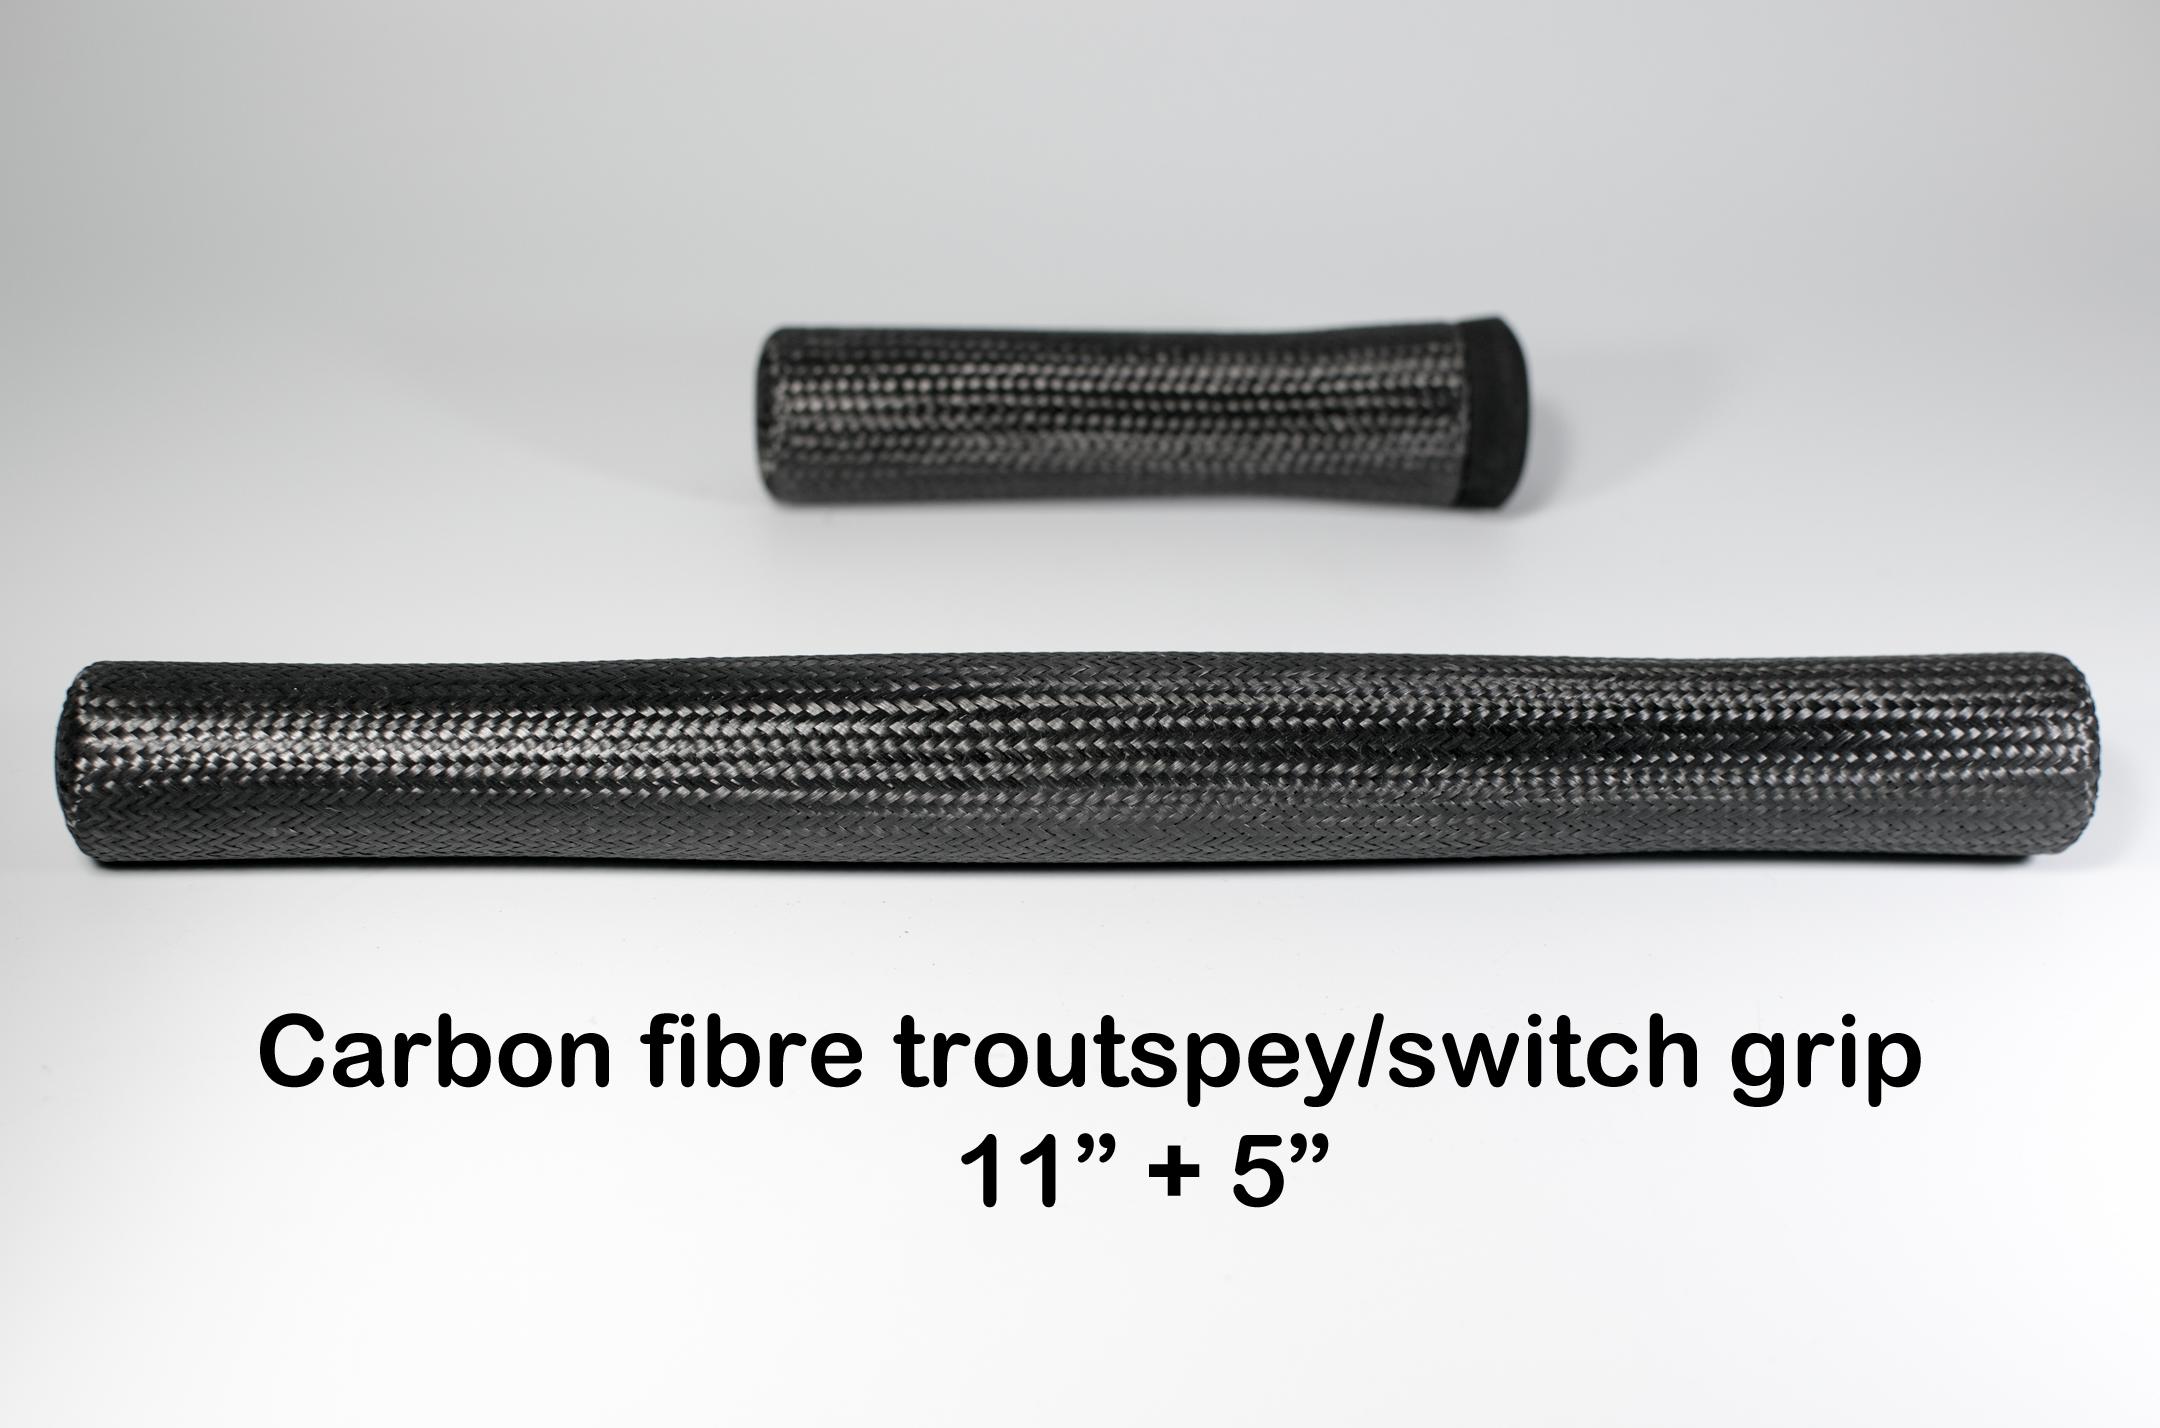 Spey or switch rod handle carbon fibre